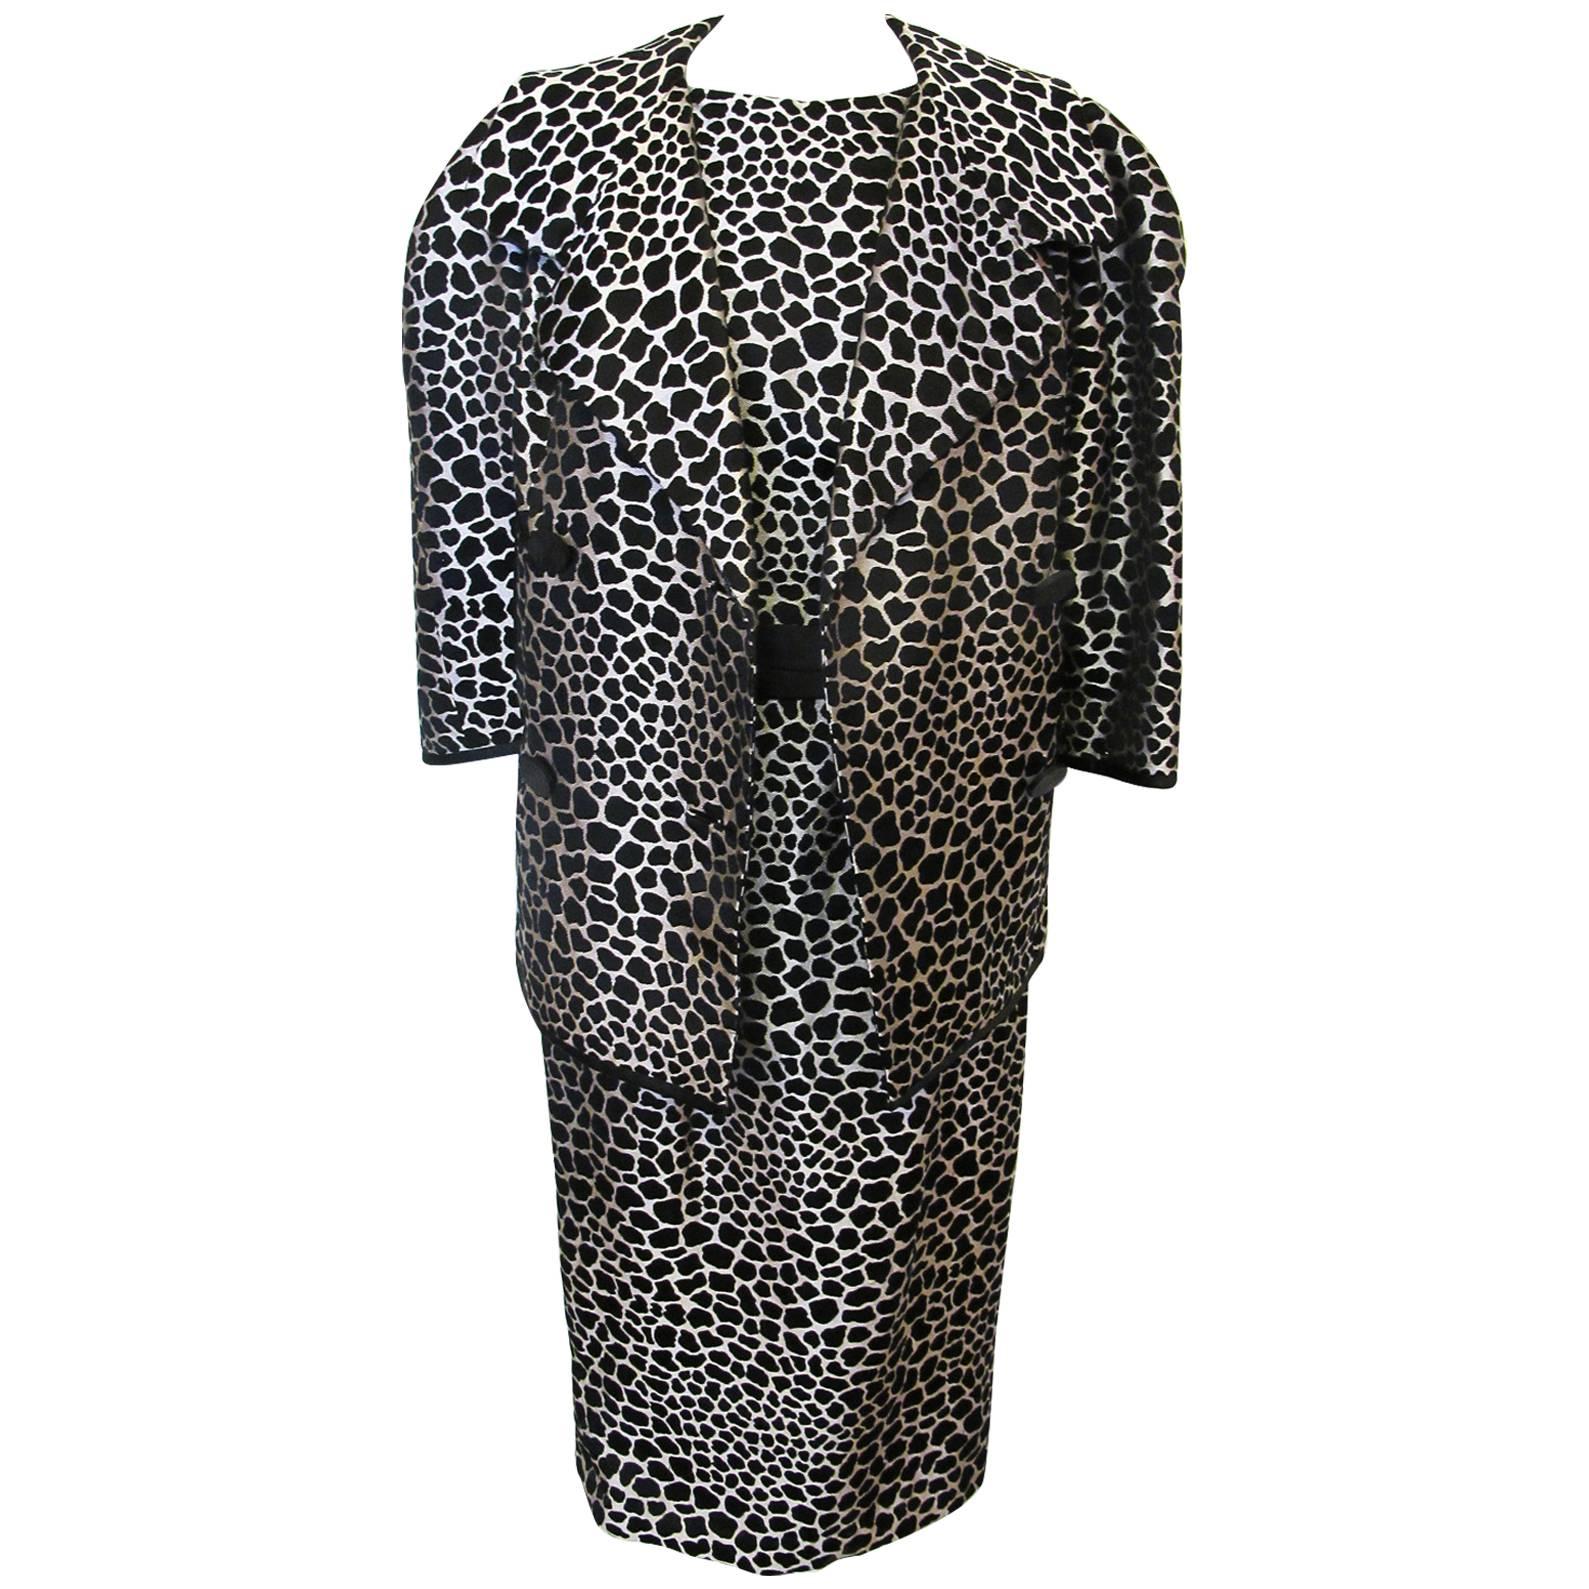 Galanos Black and White Giraffe Print Sleeveless Dress with Matching Jacket For Sale